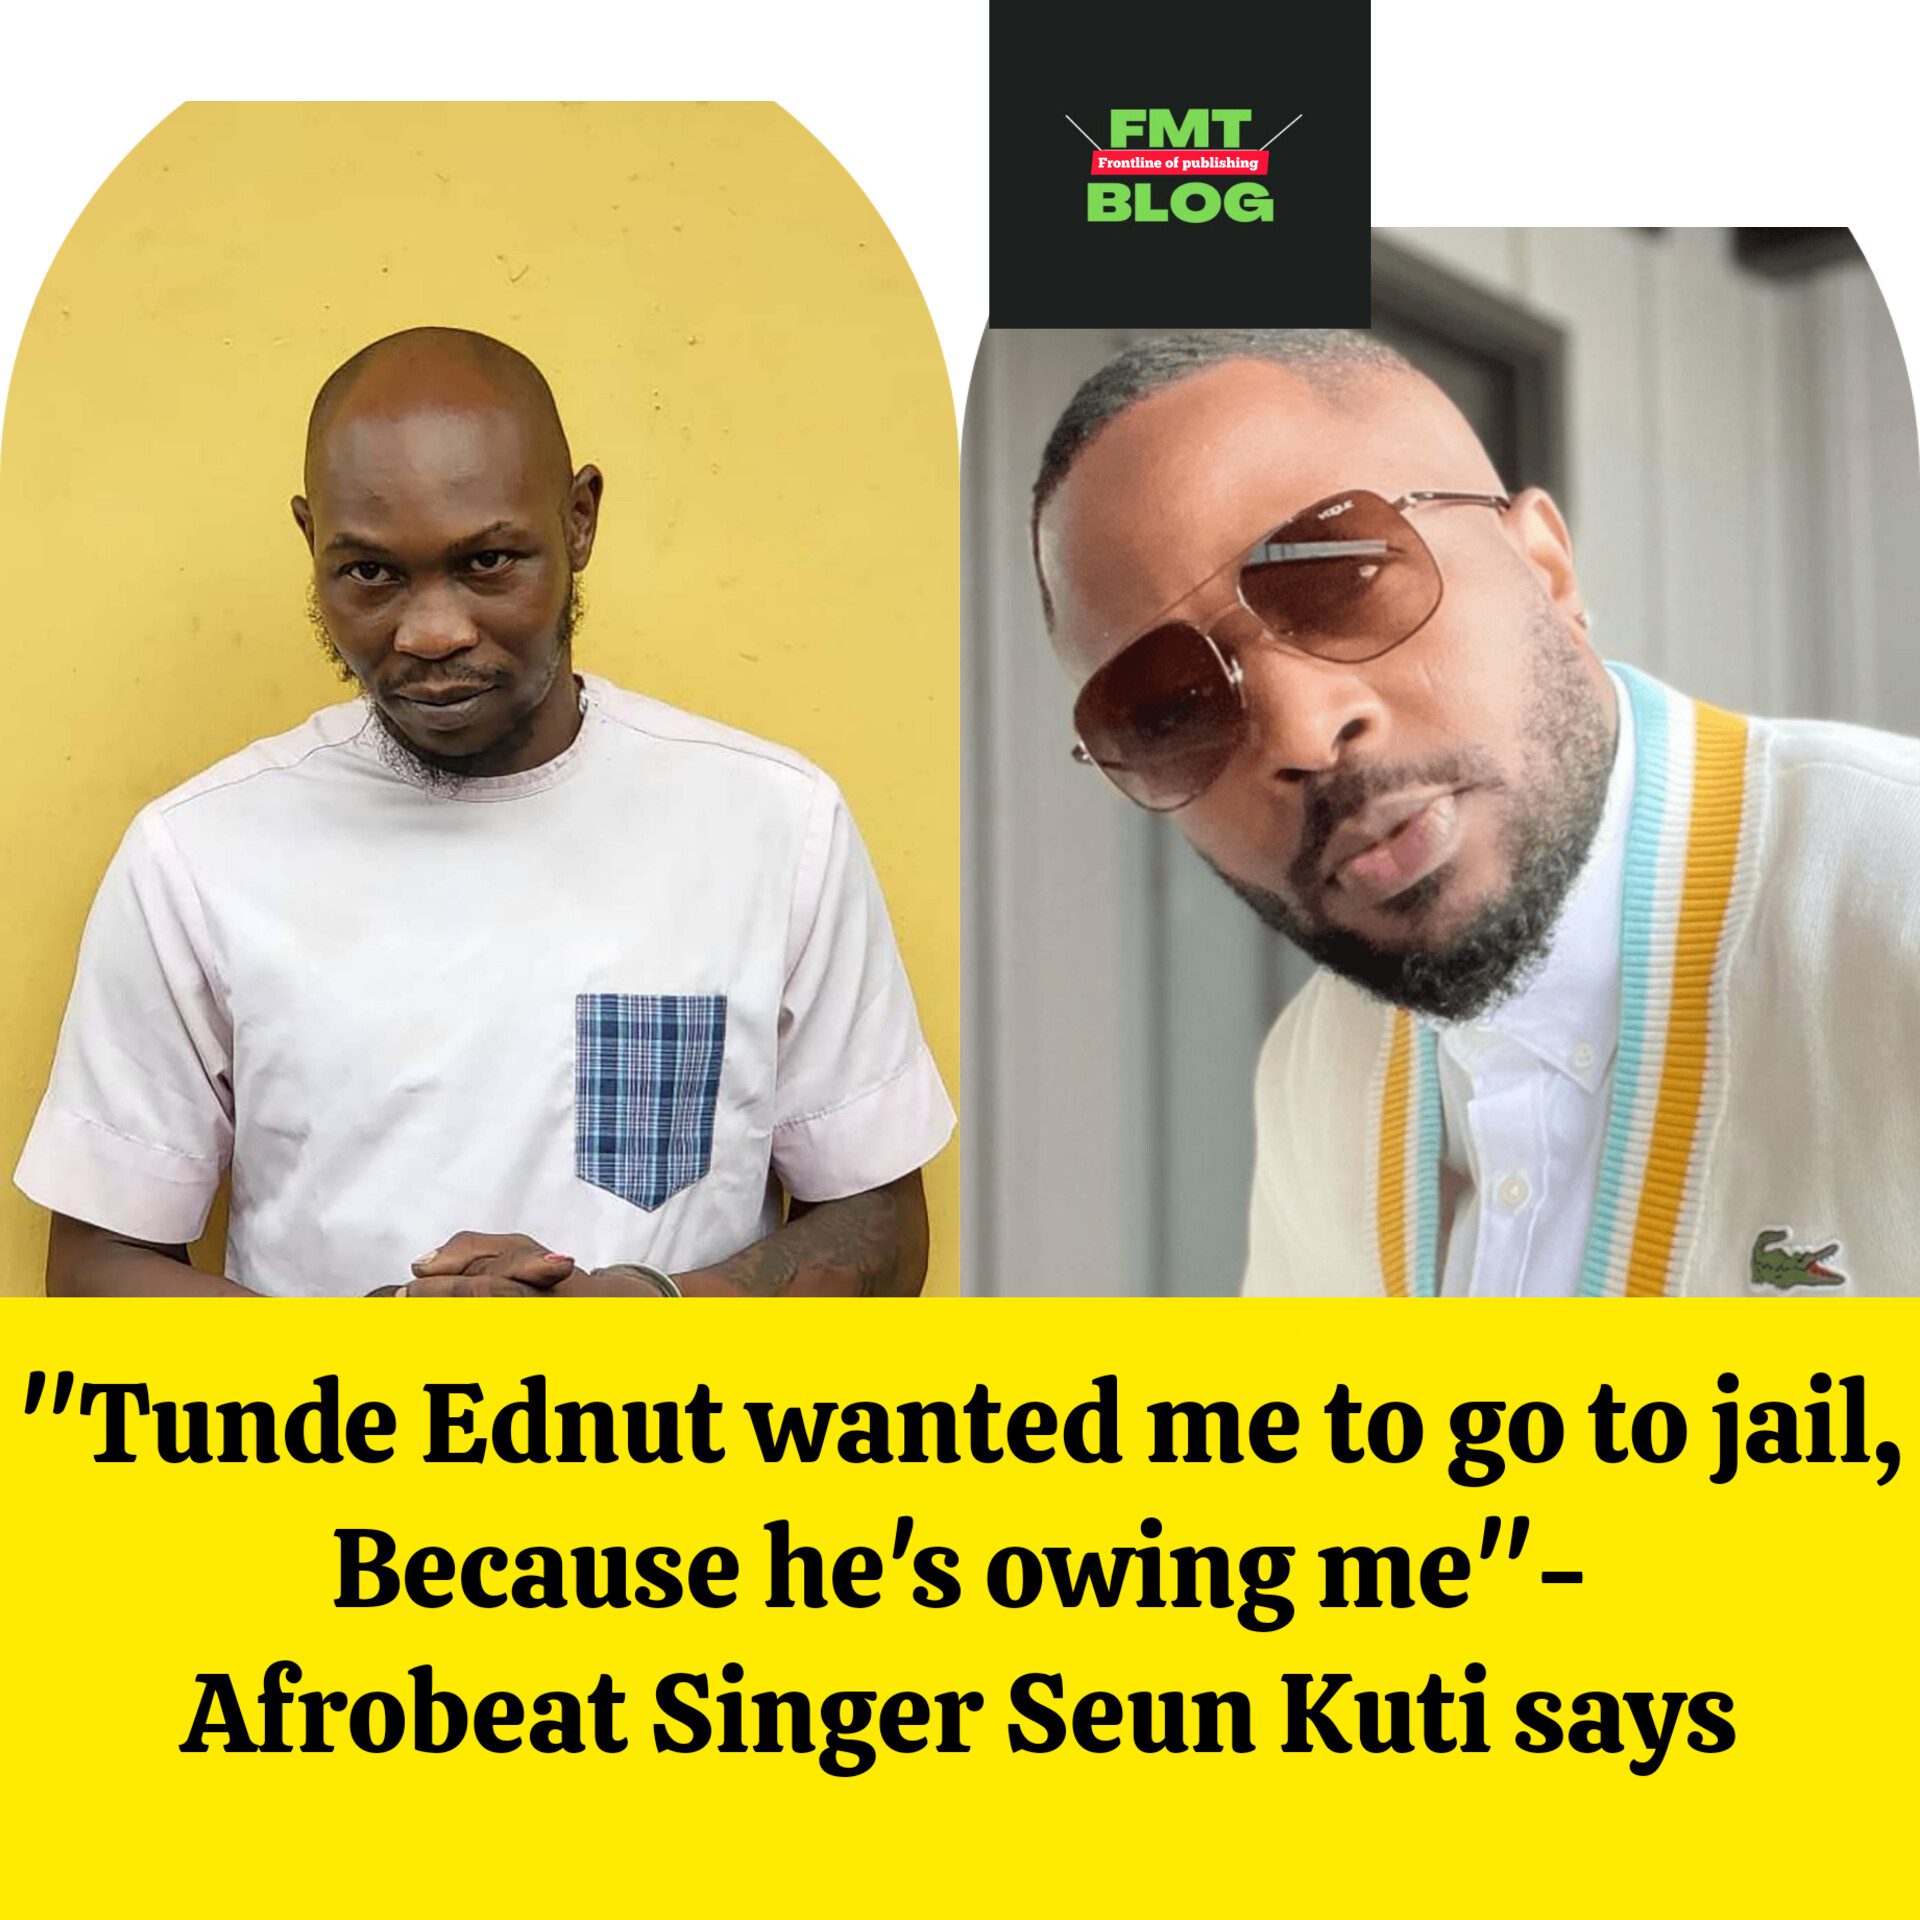 ”Tunde Ednut wanted me to go to jail Because he’s owing me”- Afrobeat singer, Seun Kuti